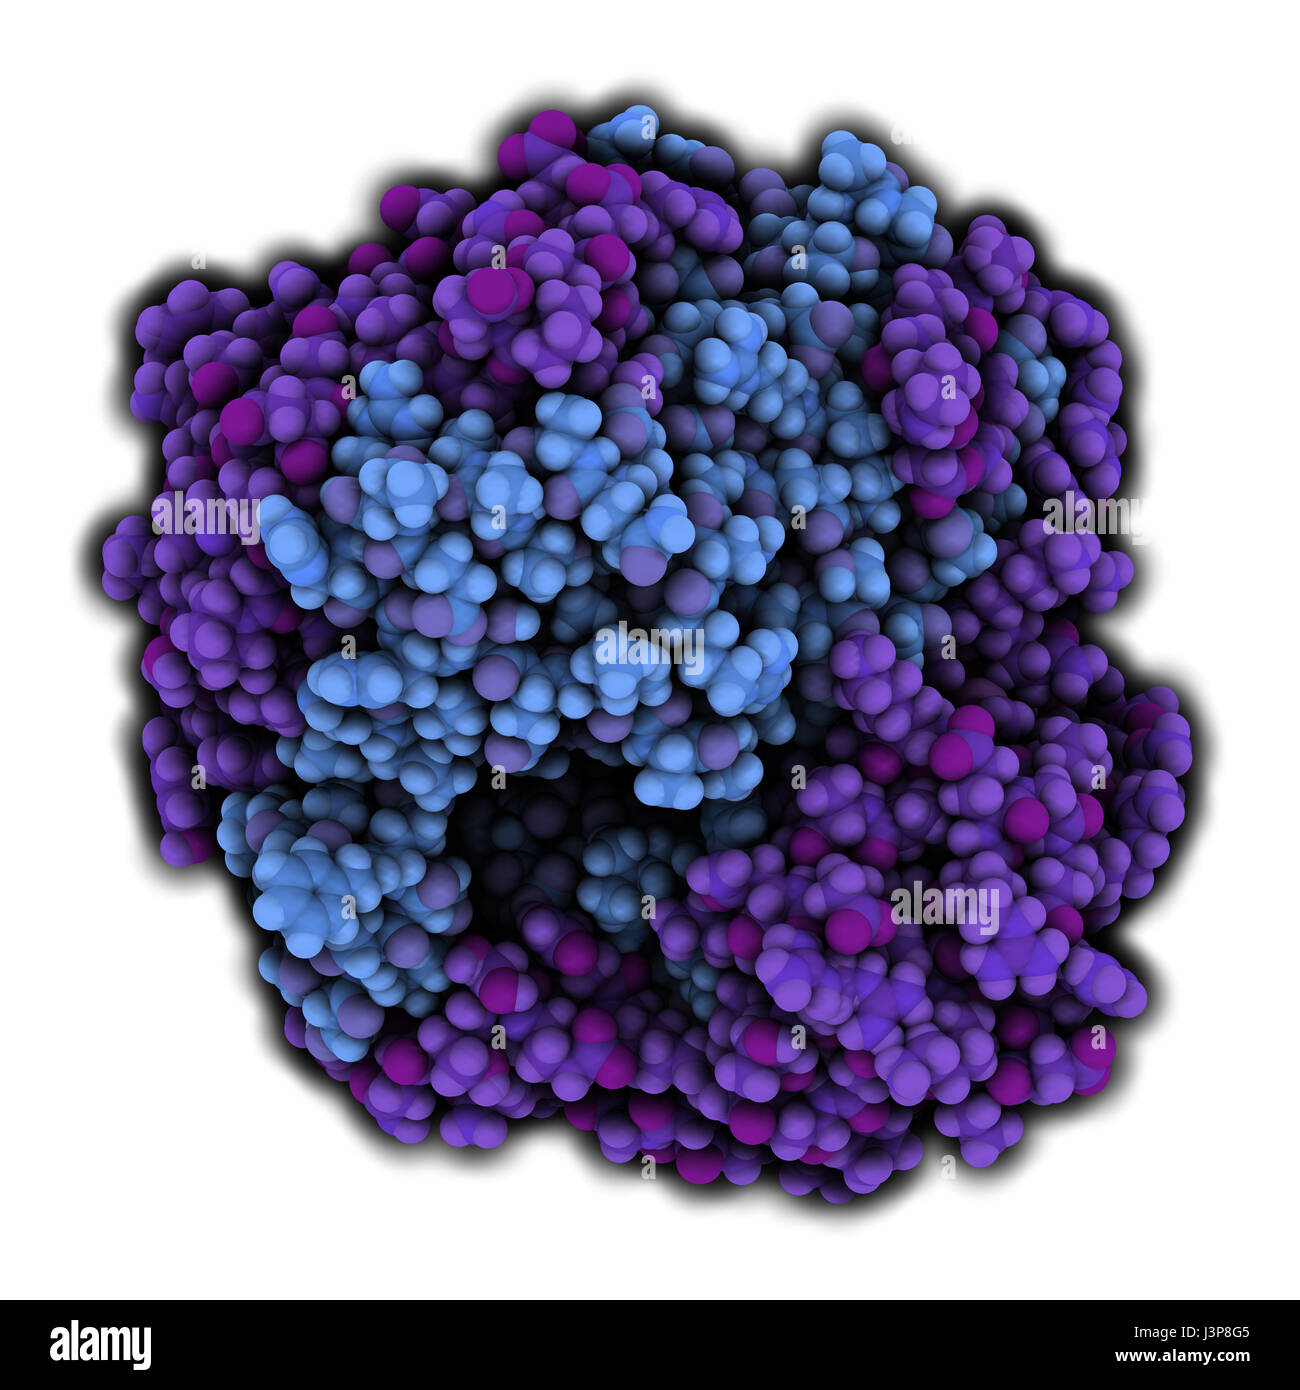 Gamma-glutamyltranspeptidase 1 (GGT 1, gamma-GT, gamma-glutamyl  transferase) enzyme. Used as diagnostic marker for liver disease. Atoms  shown as color Stock Photo - Alamy